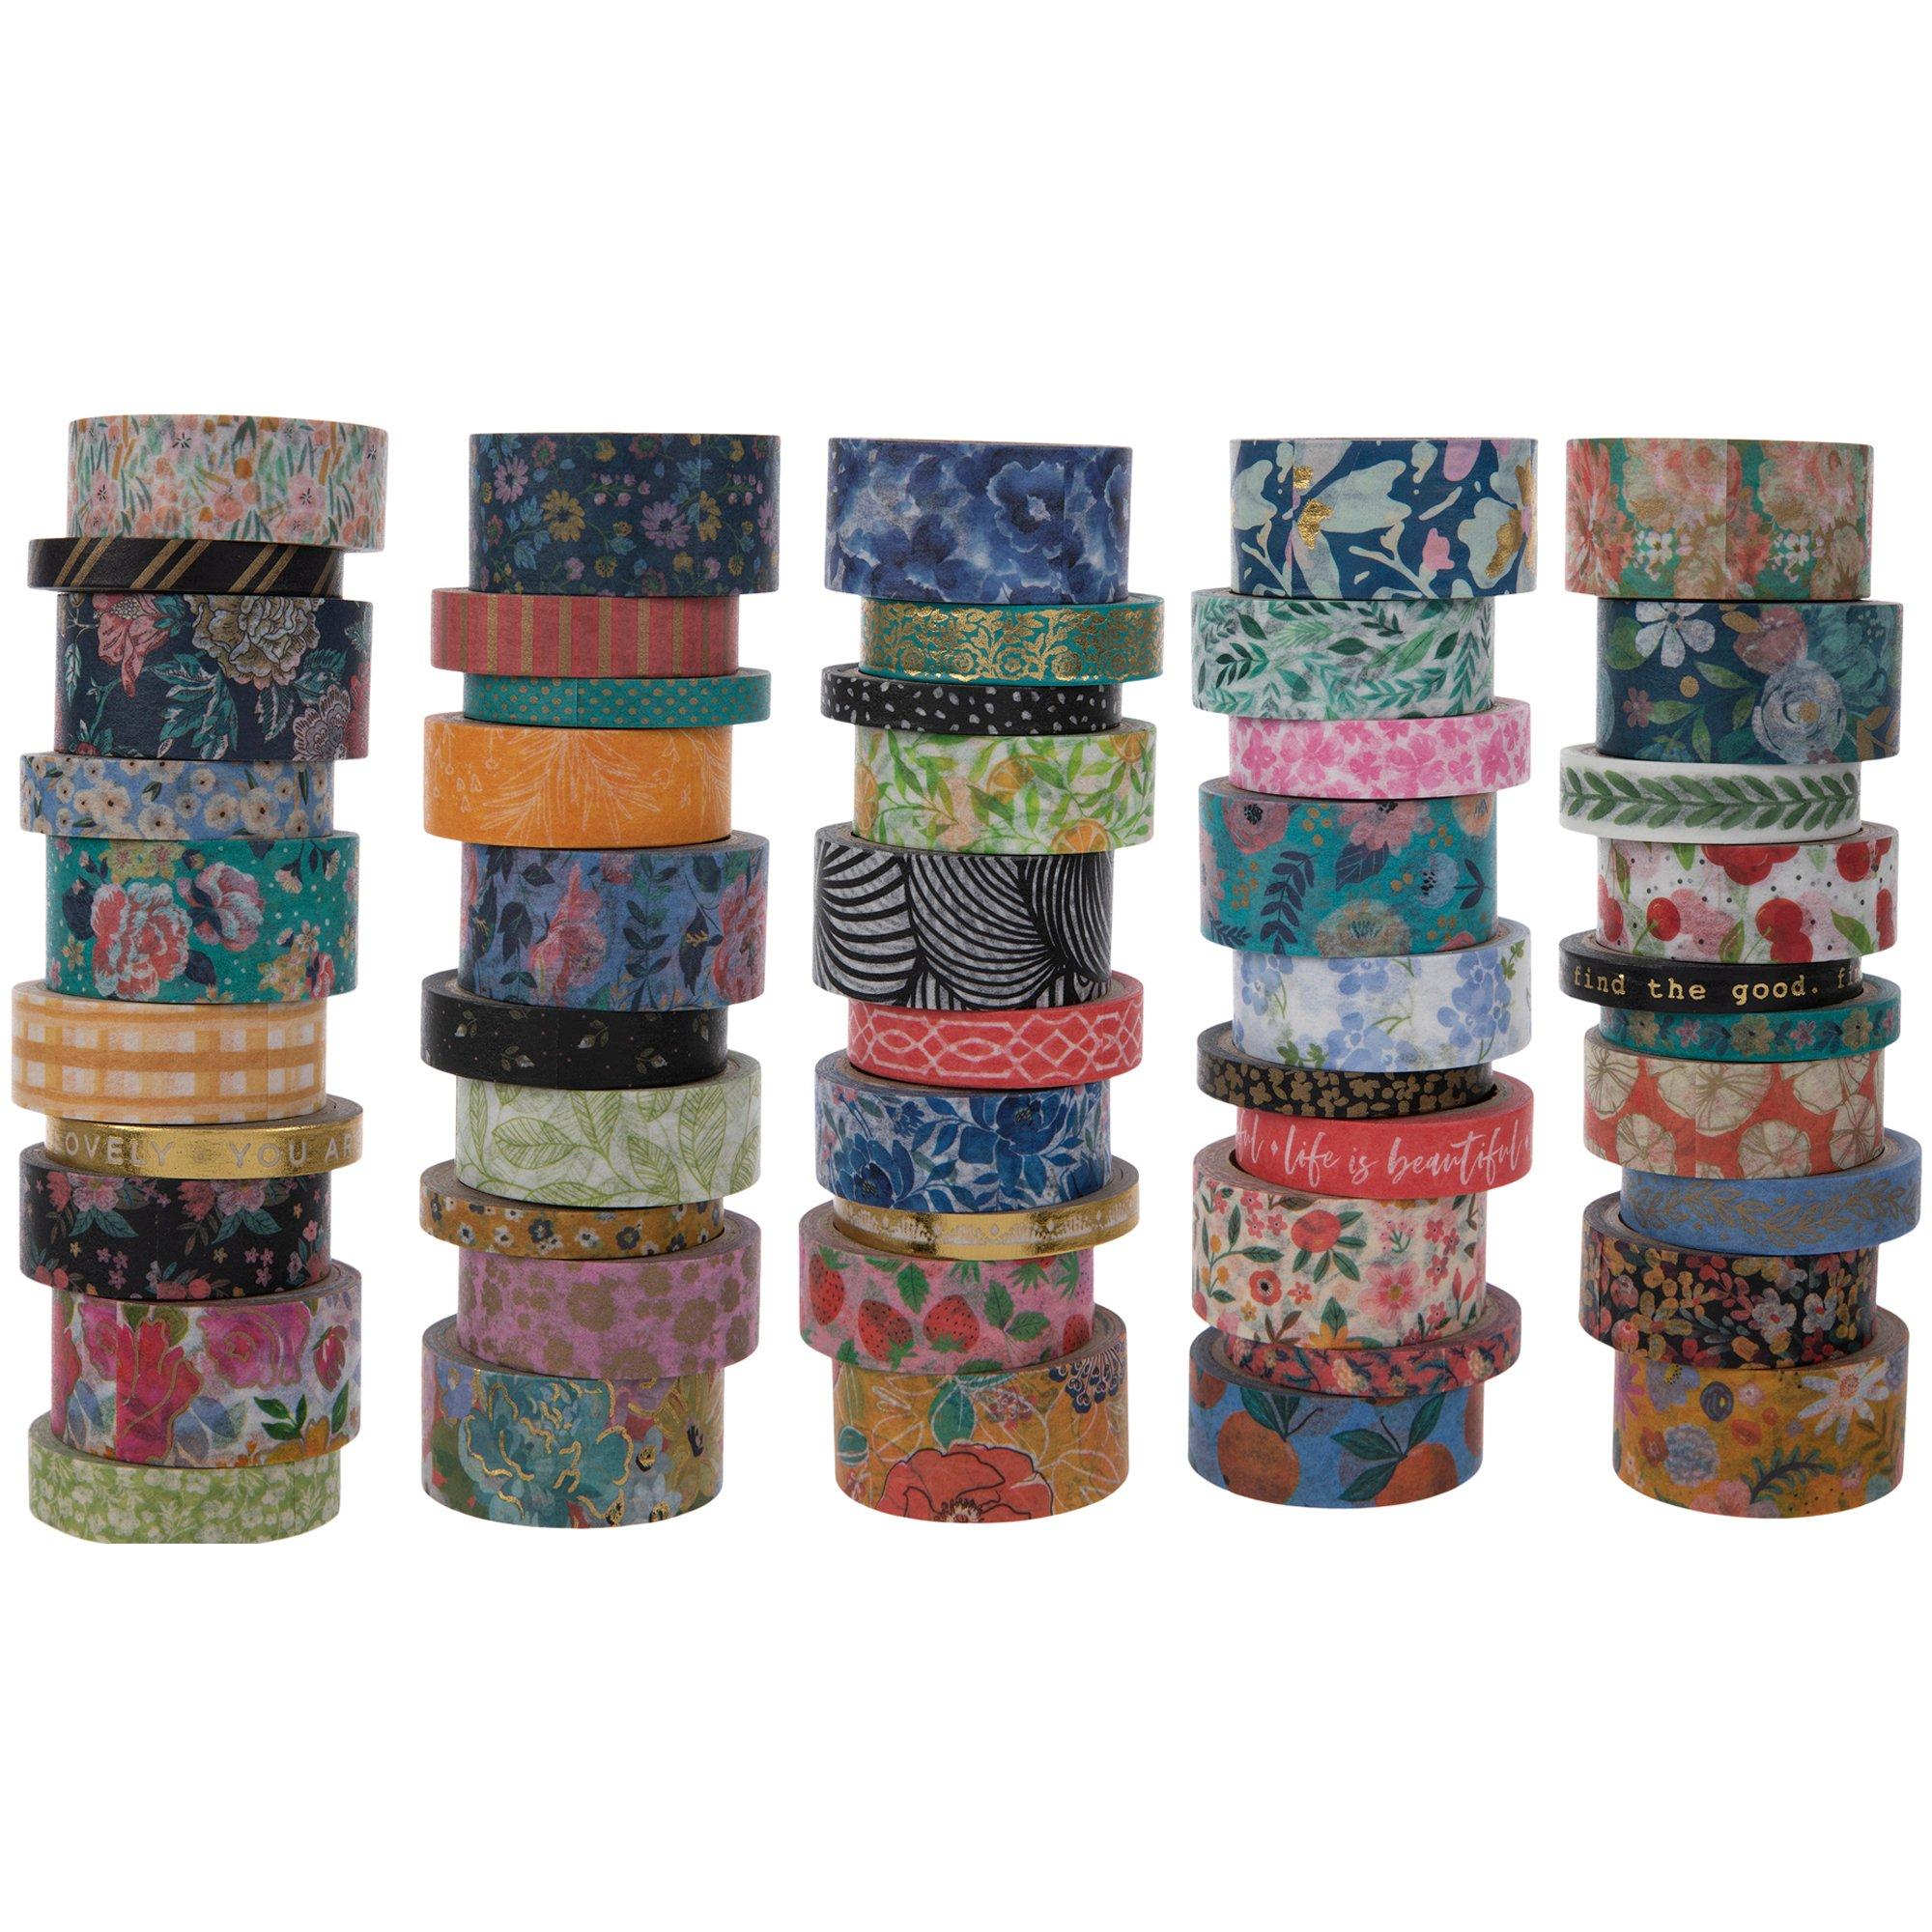 Glitter Floral Washi Tape Flower Washi Tape By Ginably